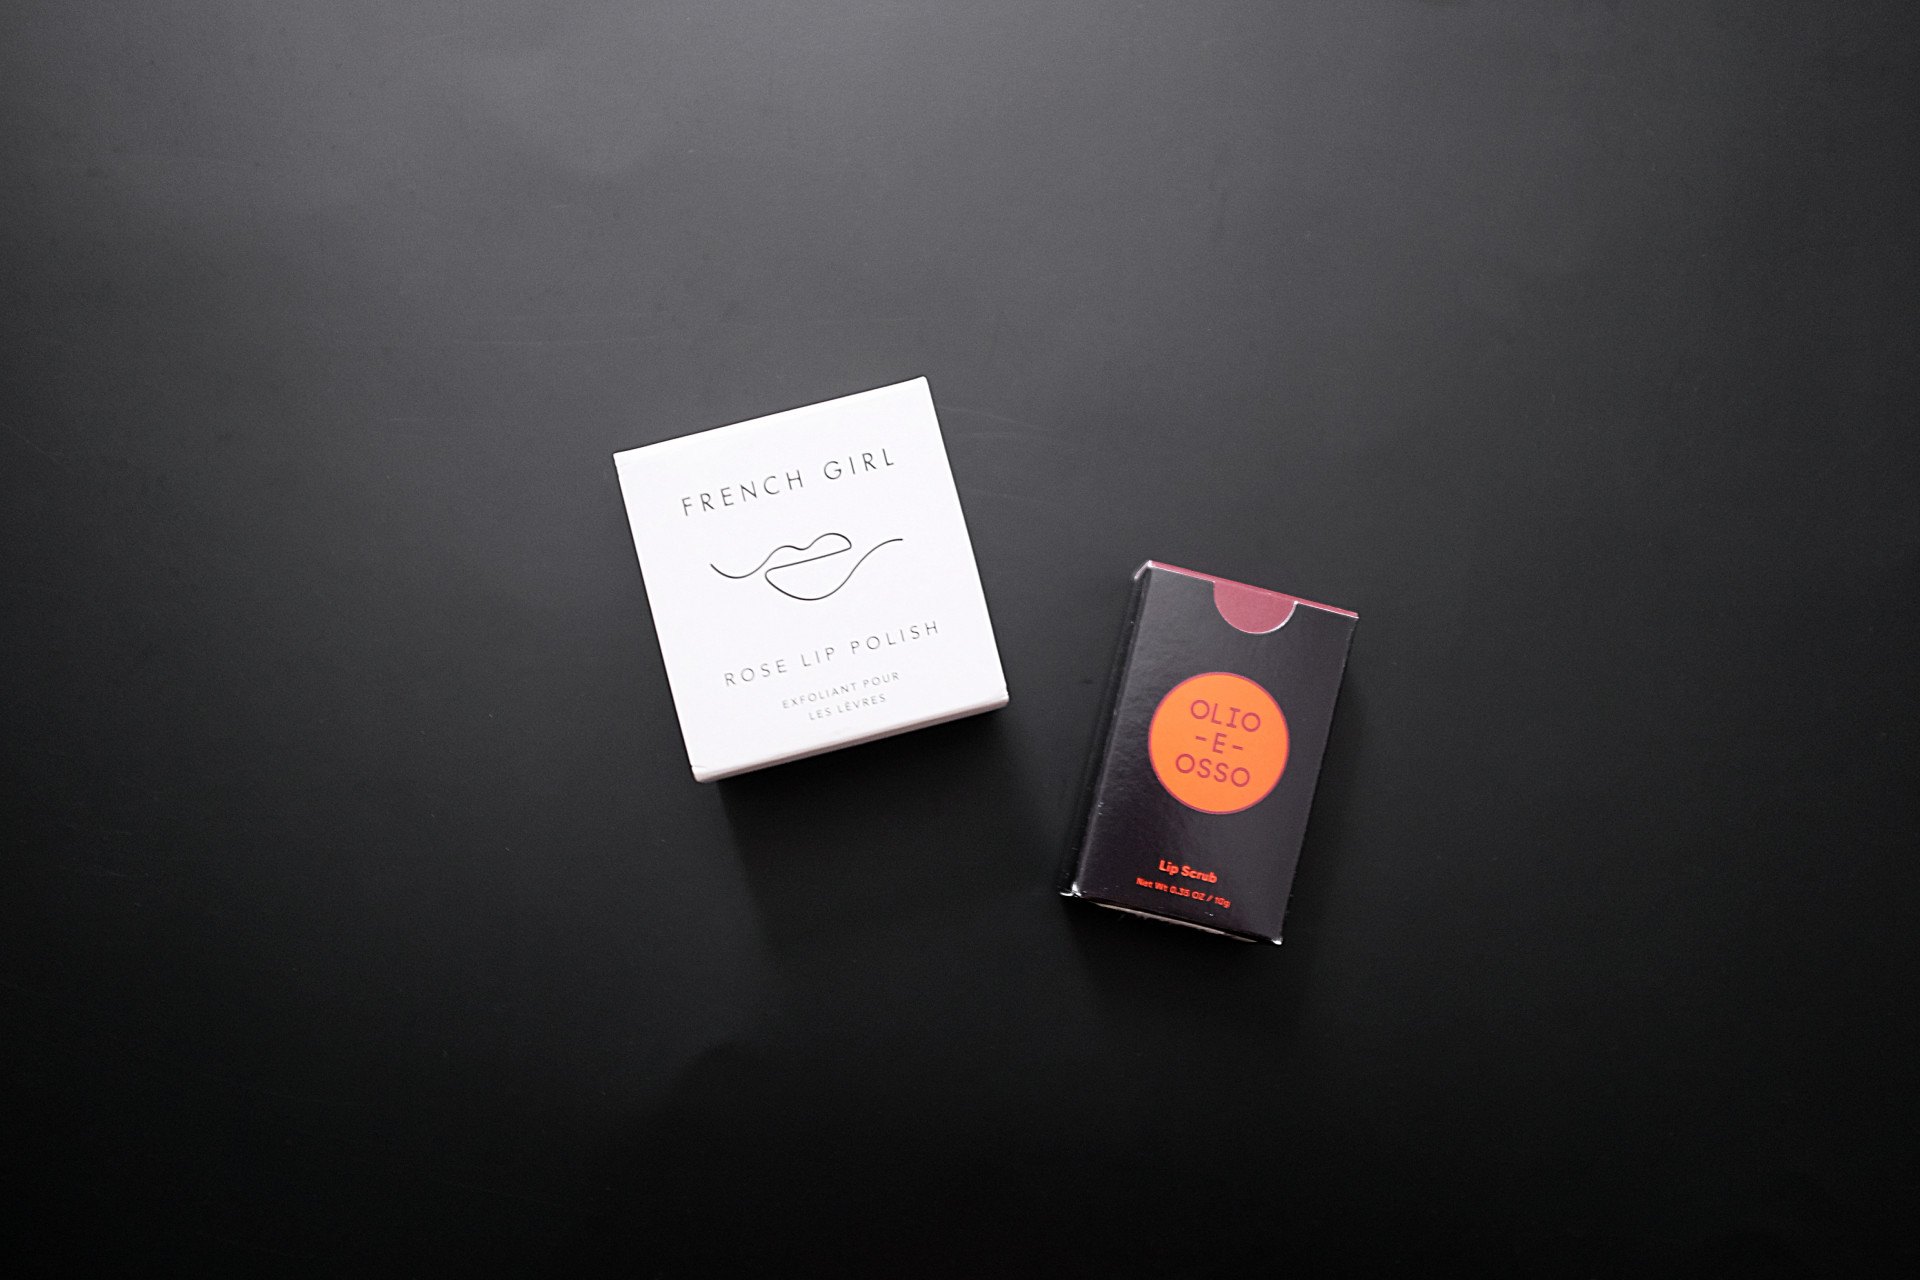 Two small boxes on a black background. On the left is a white box that reads "FRENCH GIRL rose lip polish" with an abstract lip line drawing. On the right is a black box with a red circle which has "Olio e Osso" printed in it